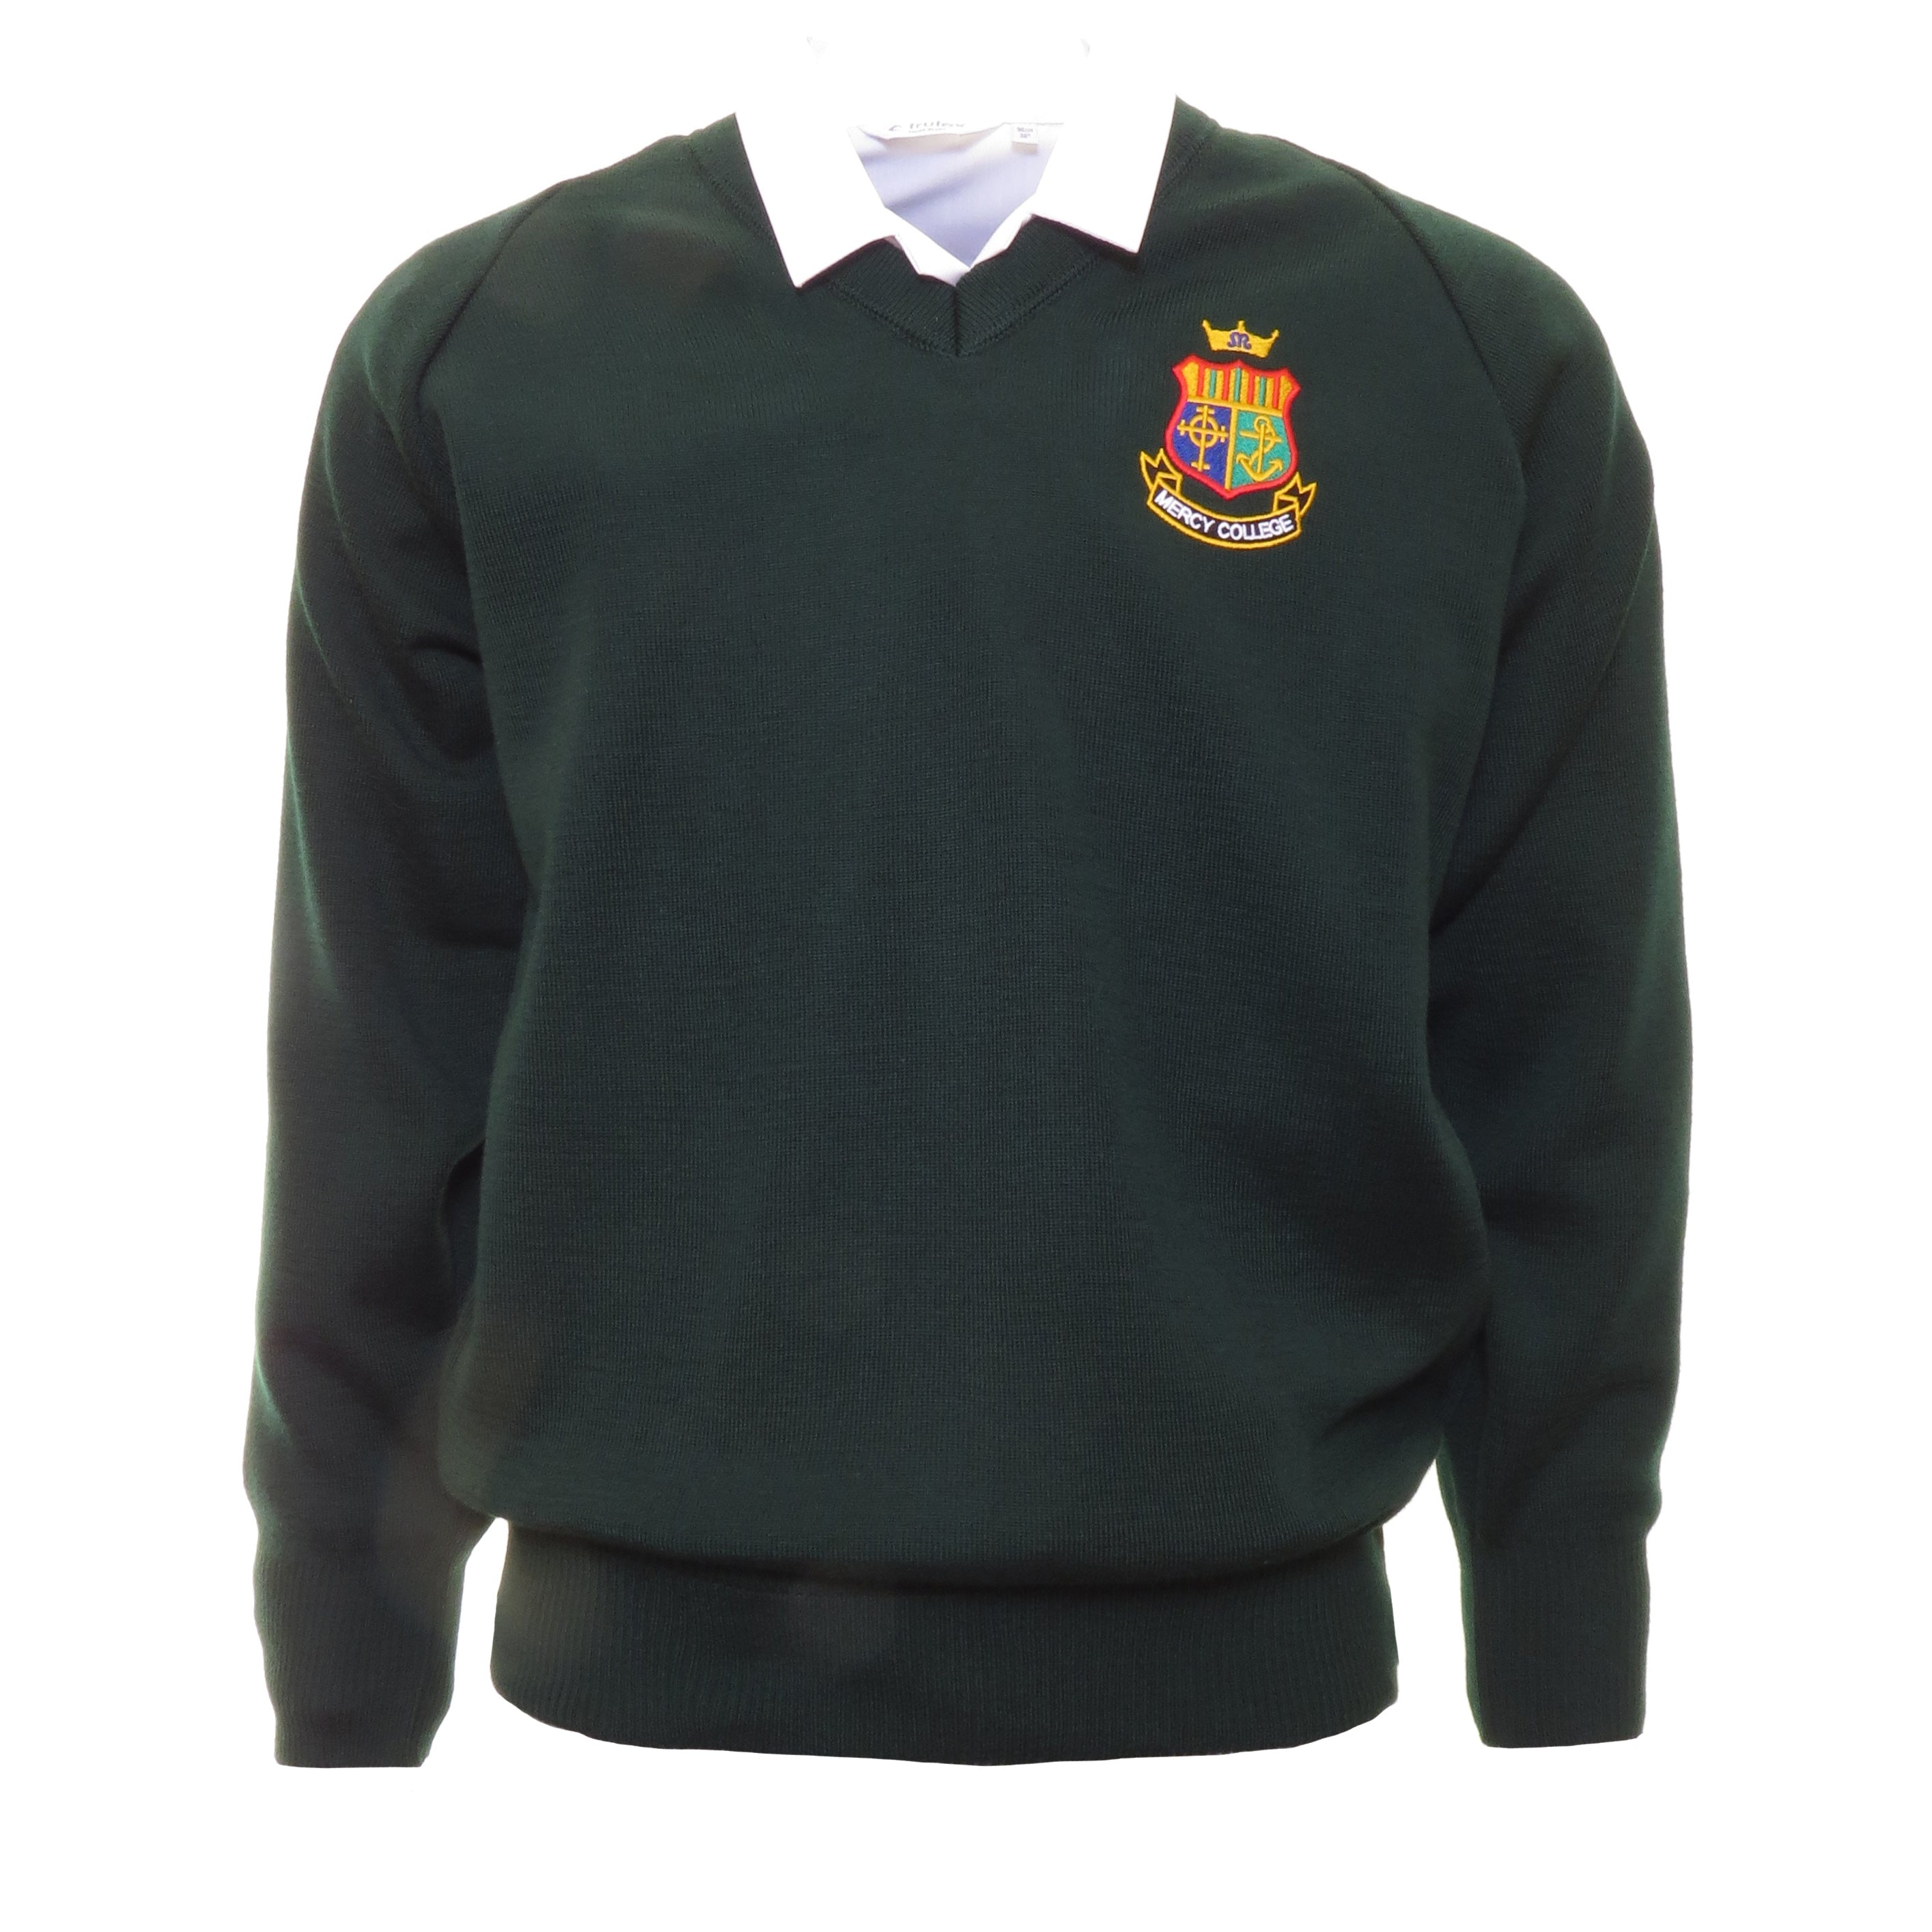 Mercy College Coolock Jumper